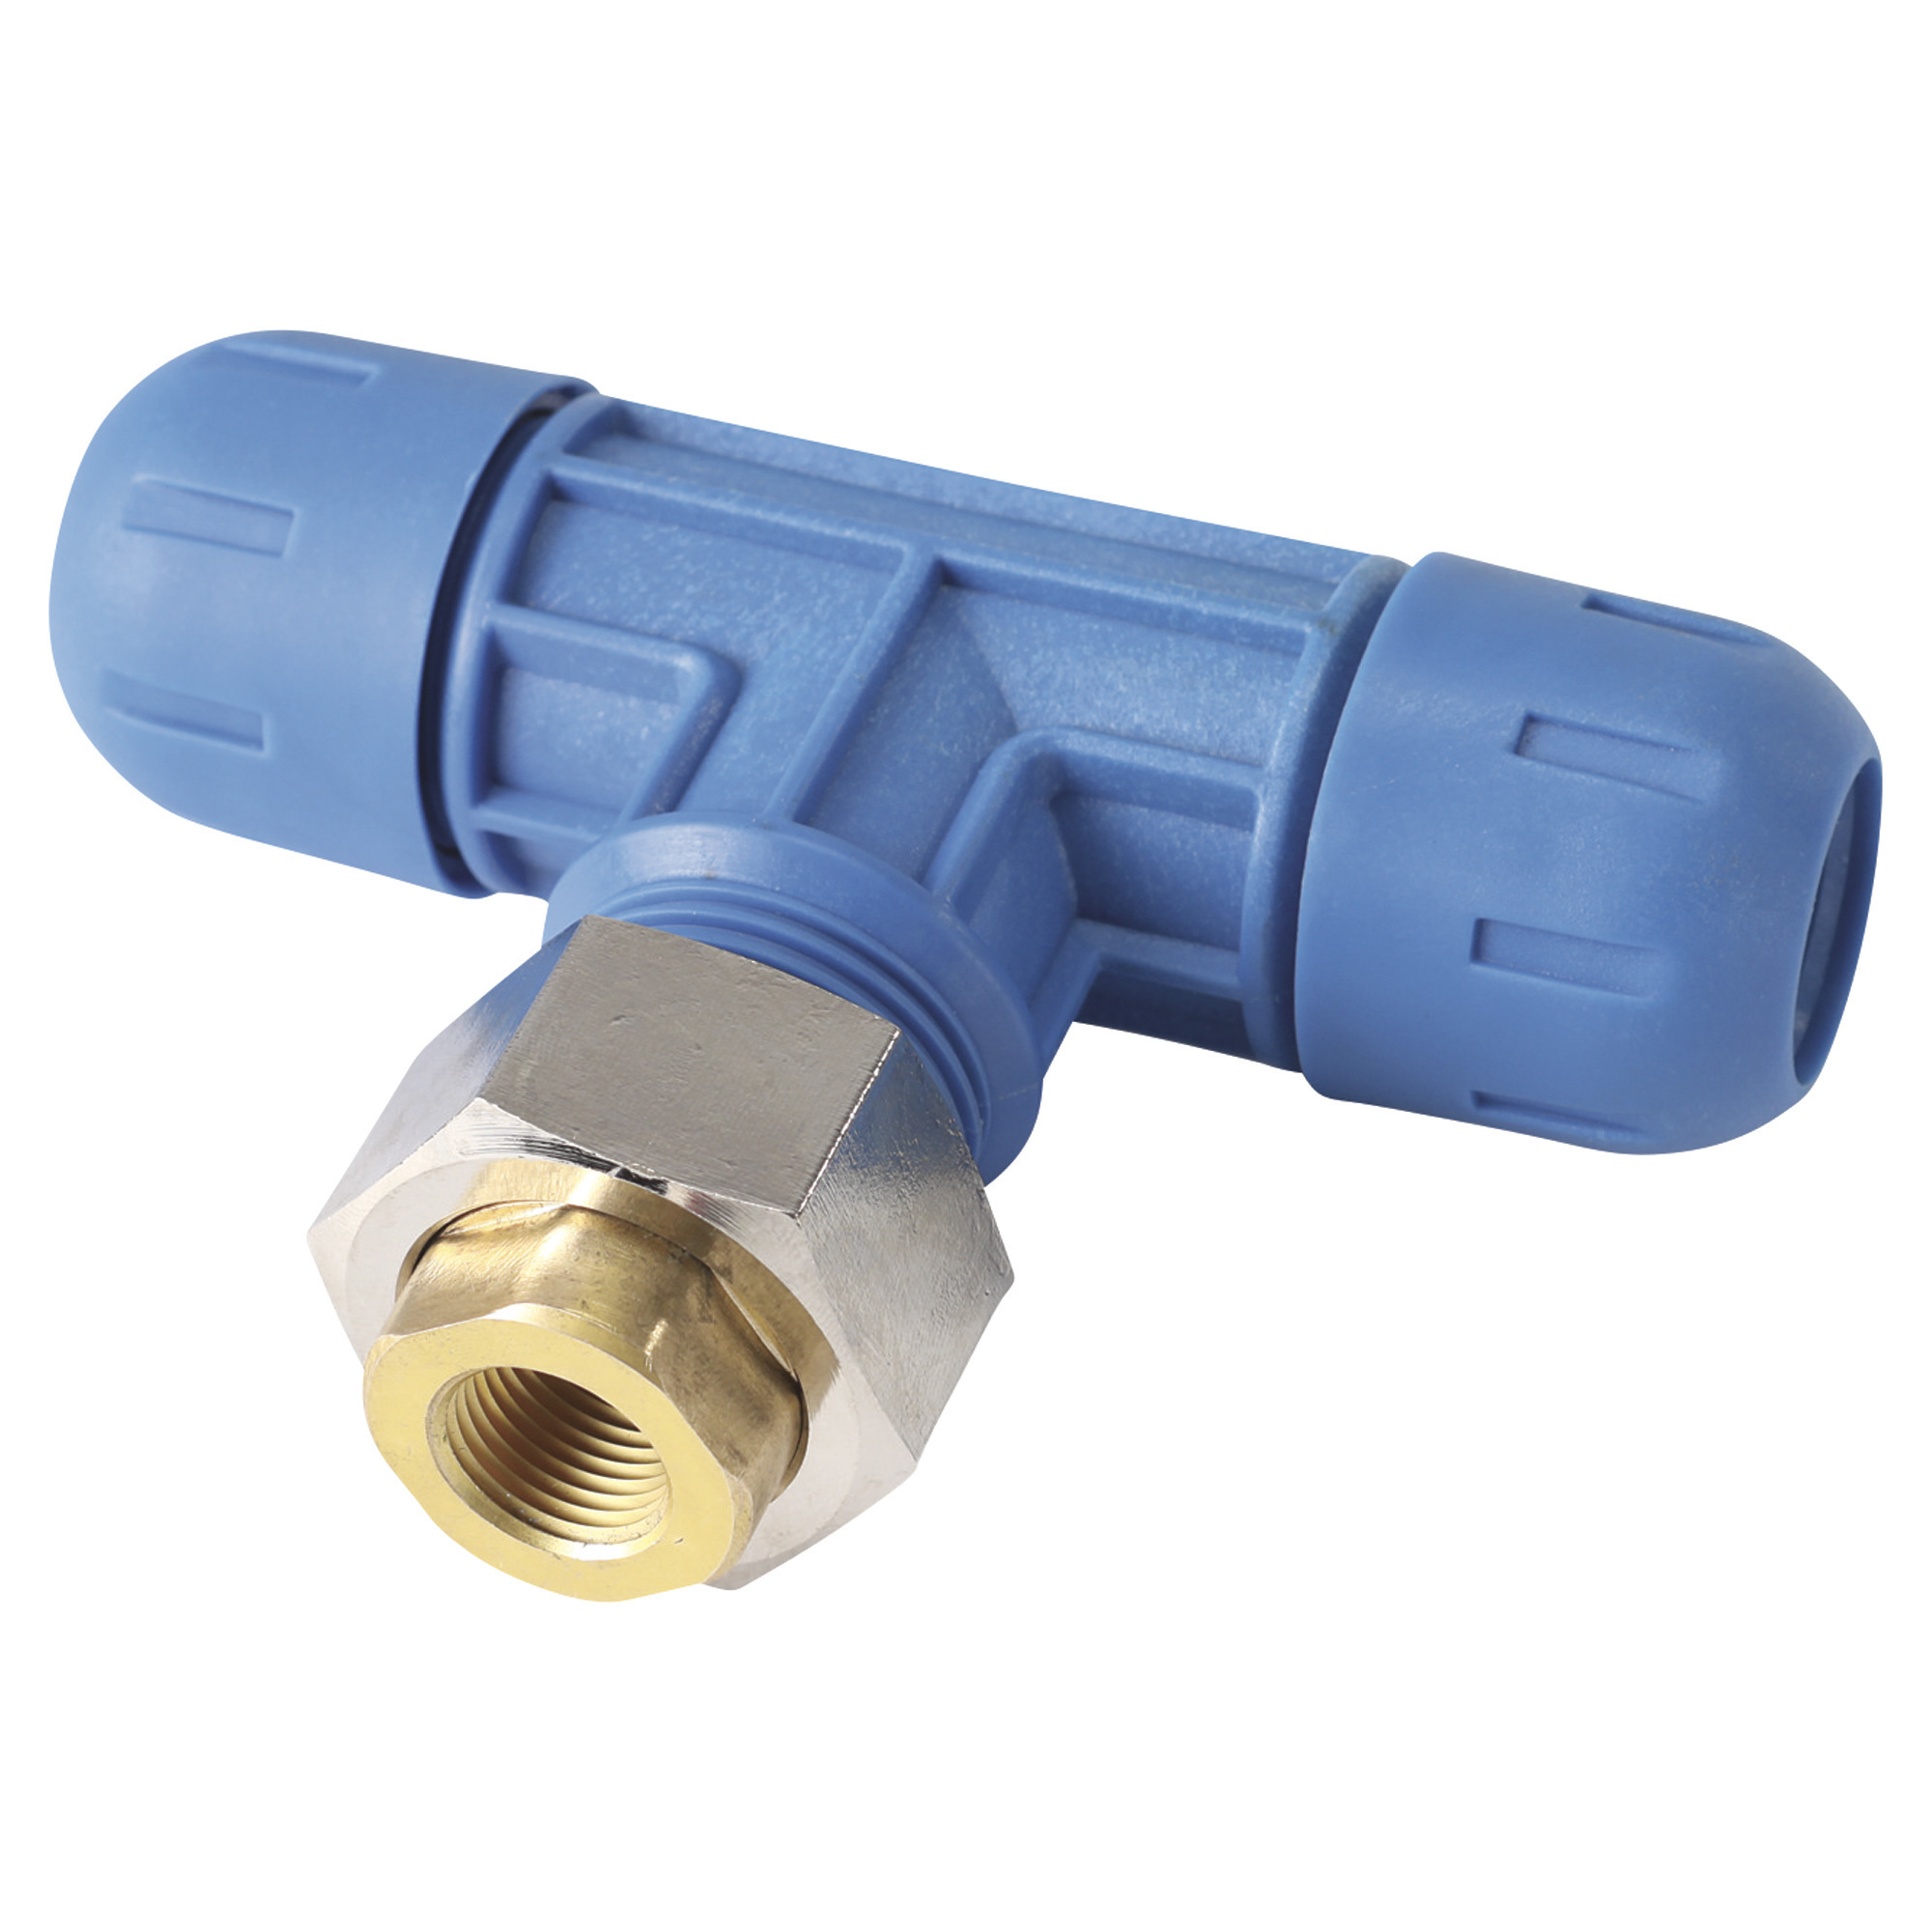 RapidAir FastPipe Reducing Union Fitting (Various Sizes) – Finish